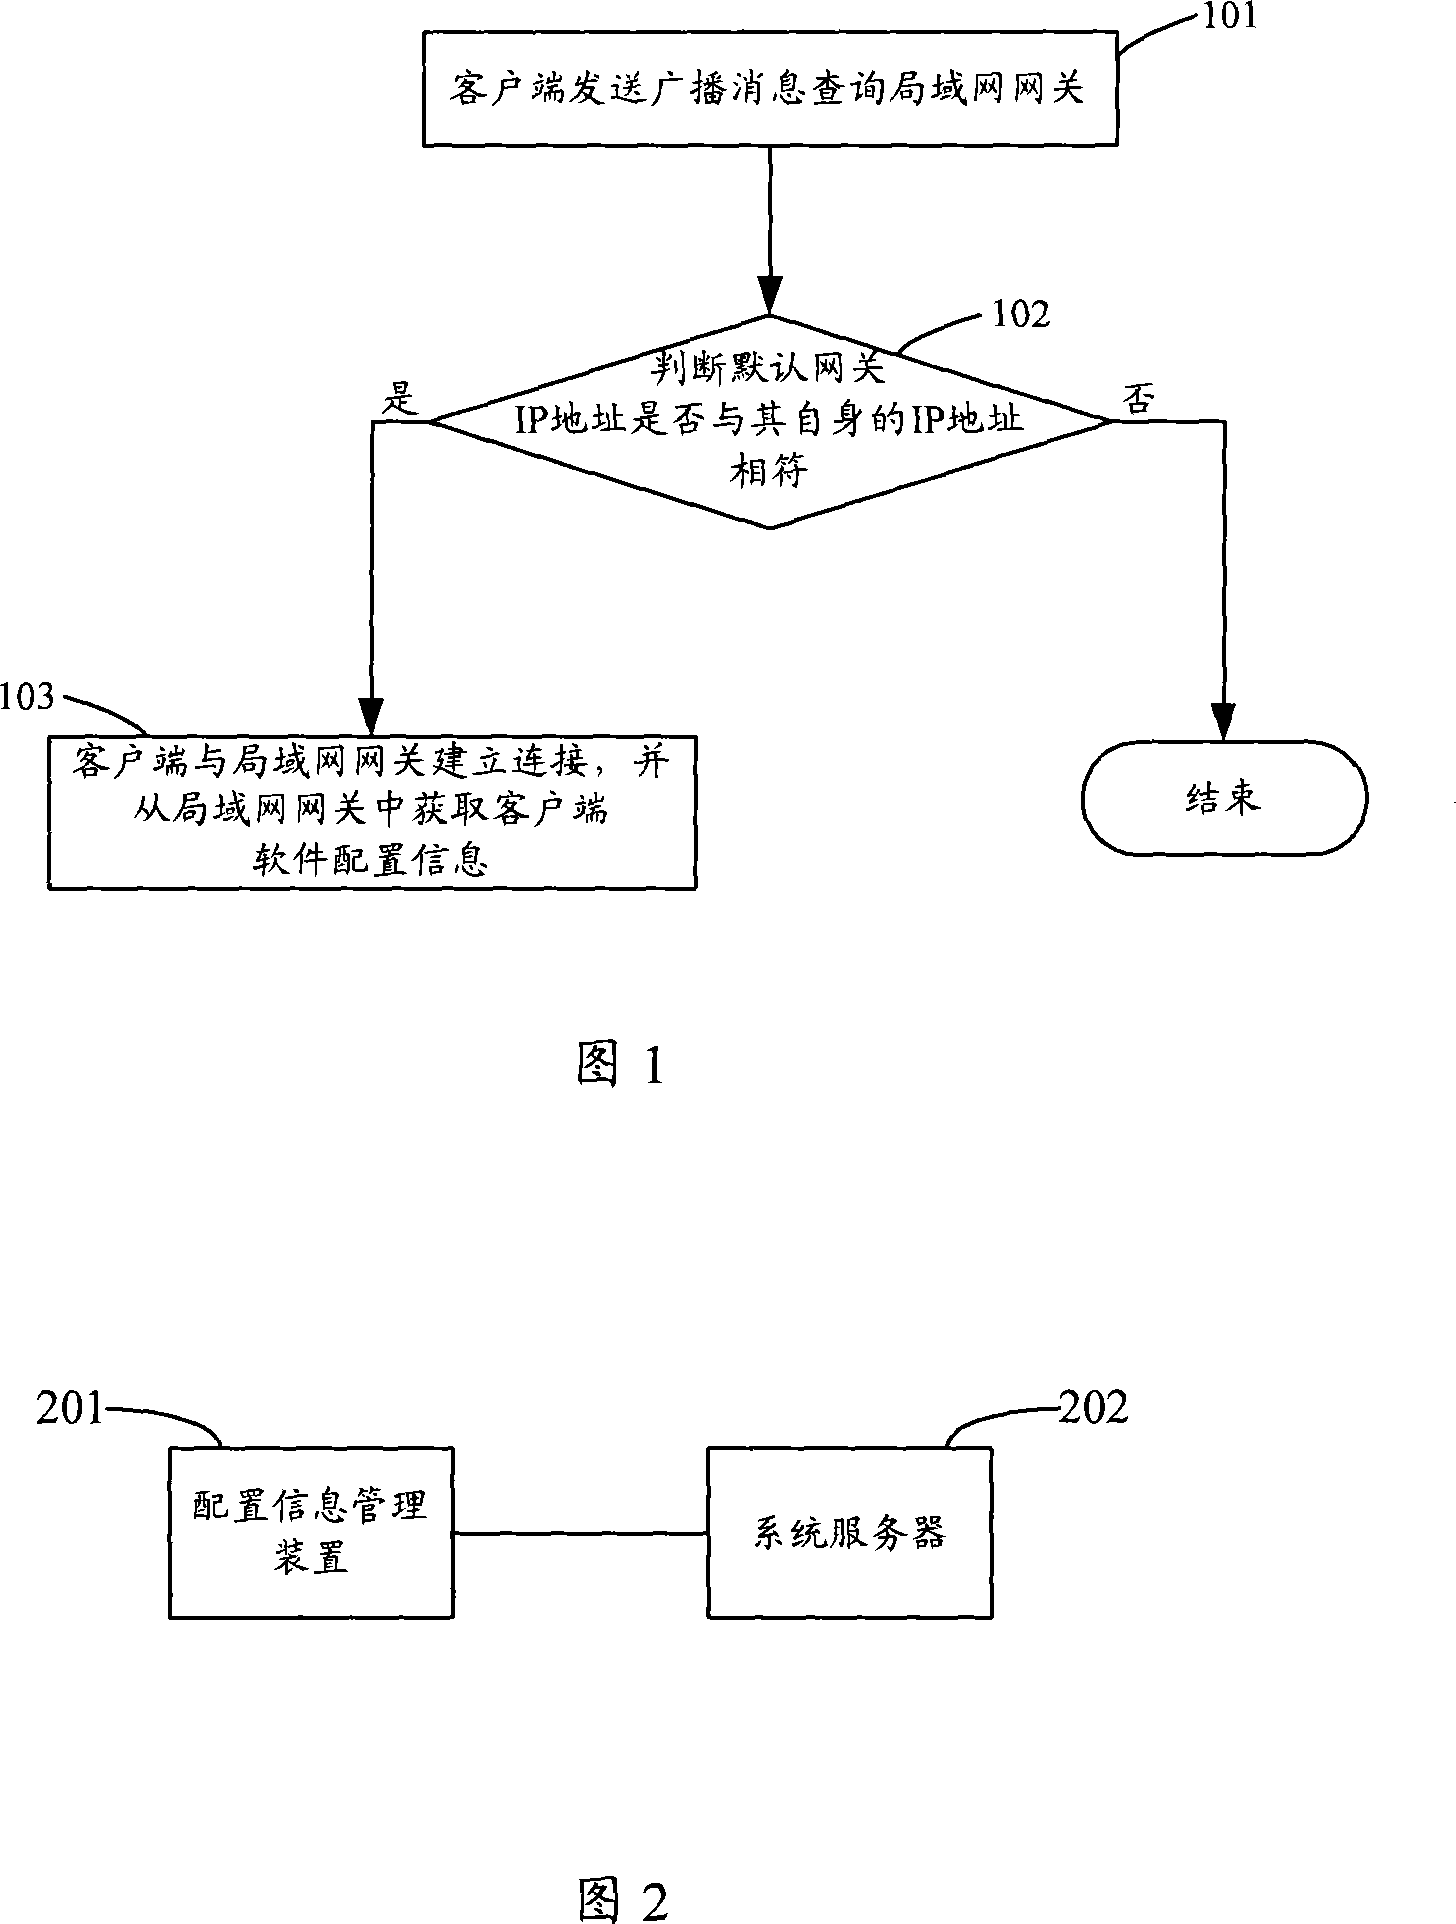 Method, system and related equipment of obtaining software configuration information